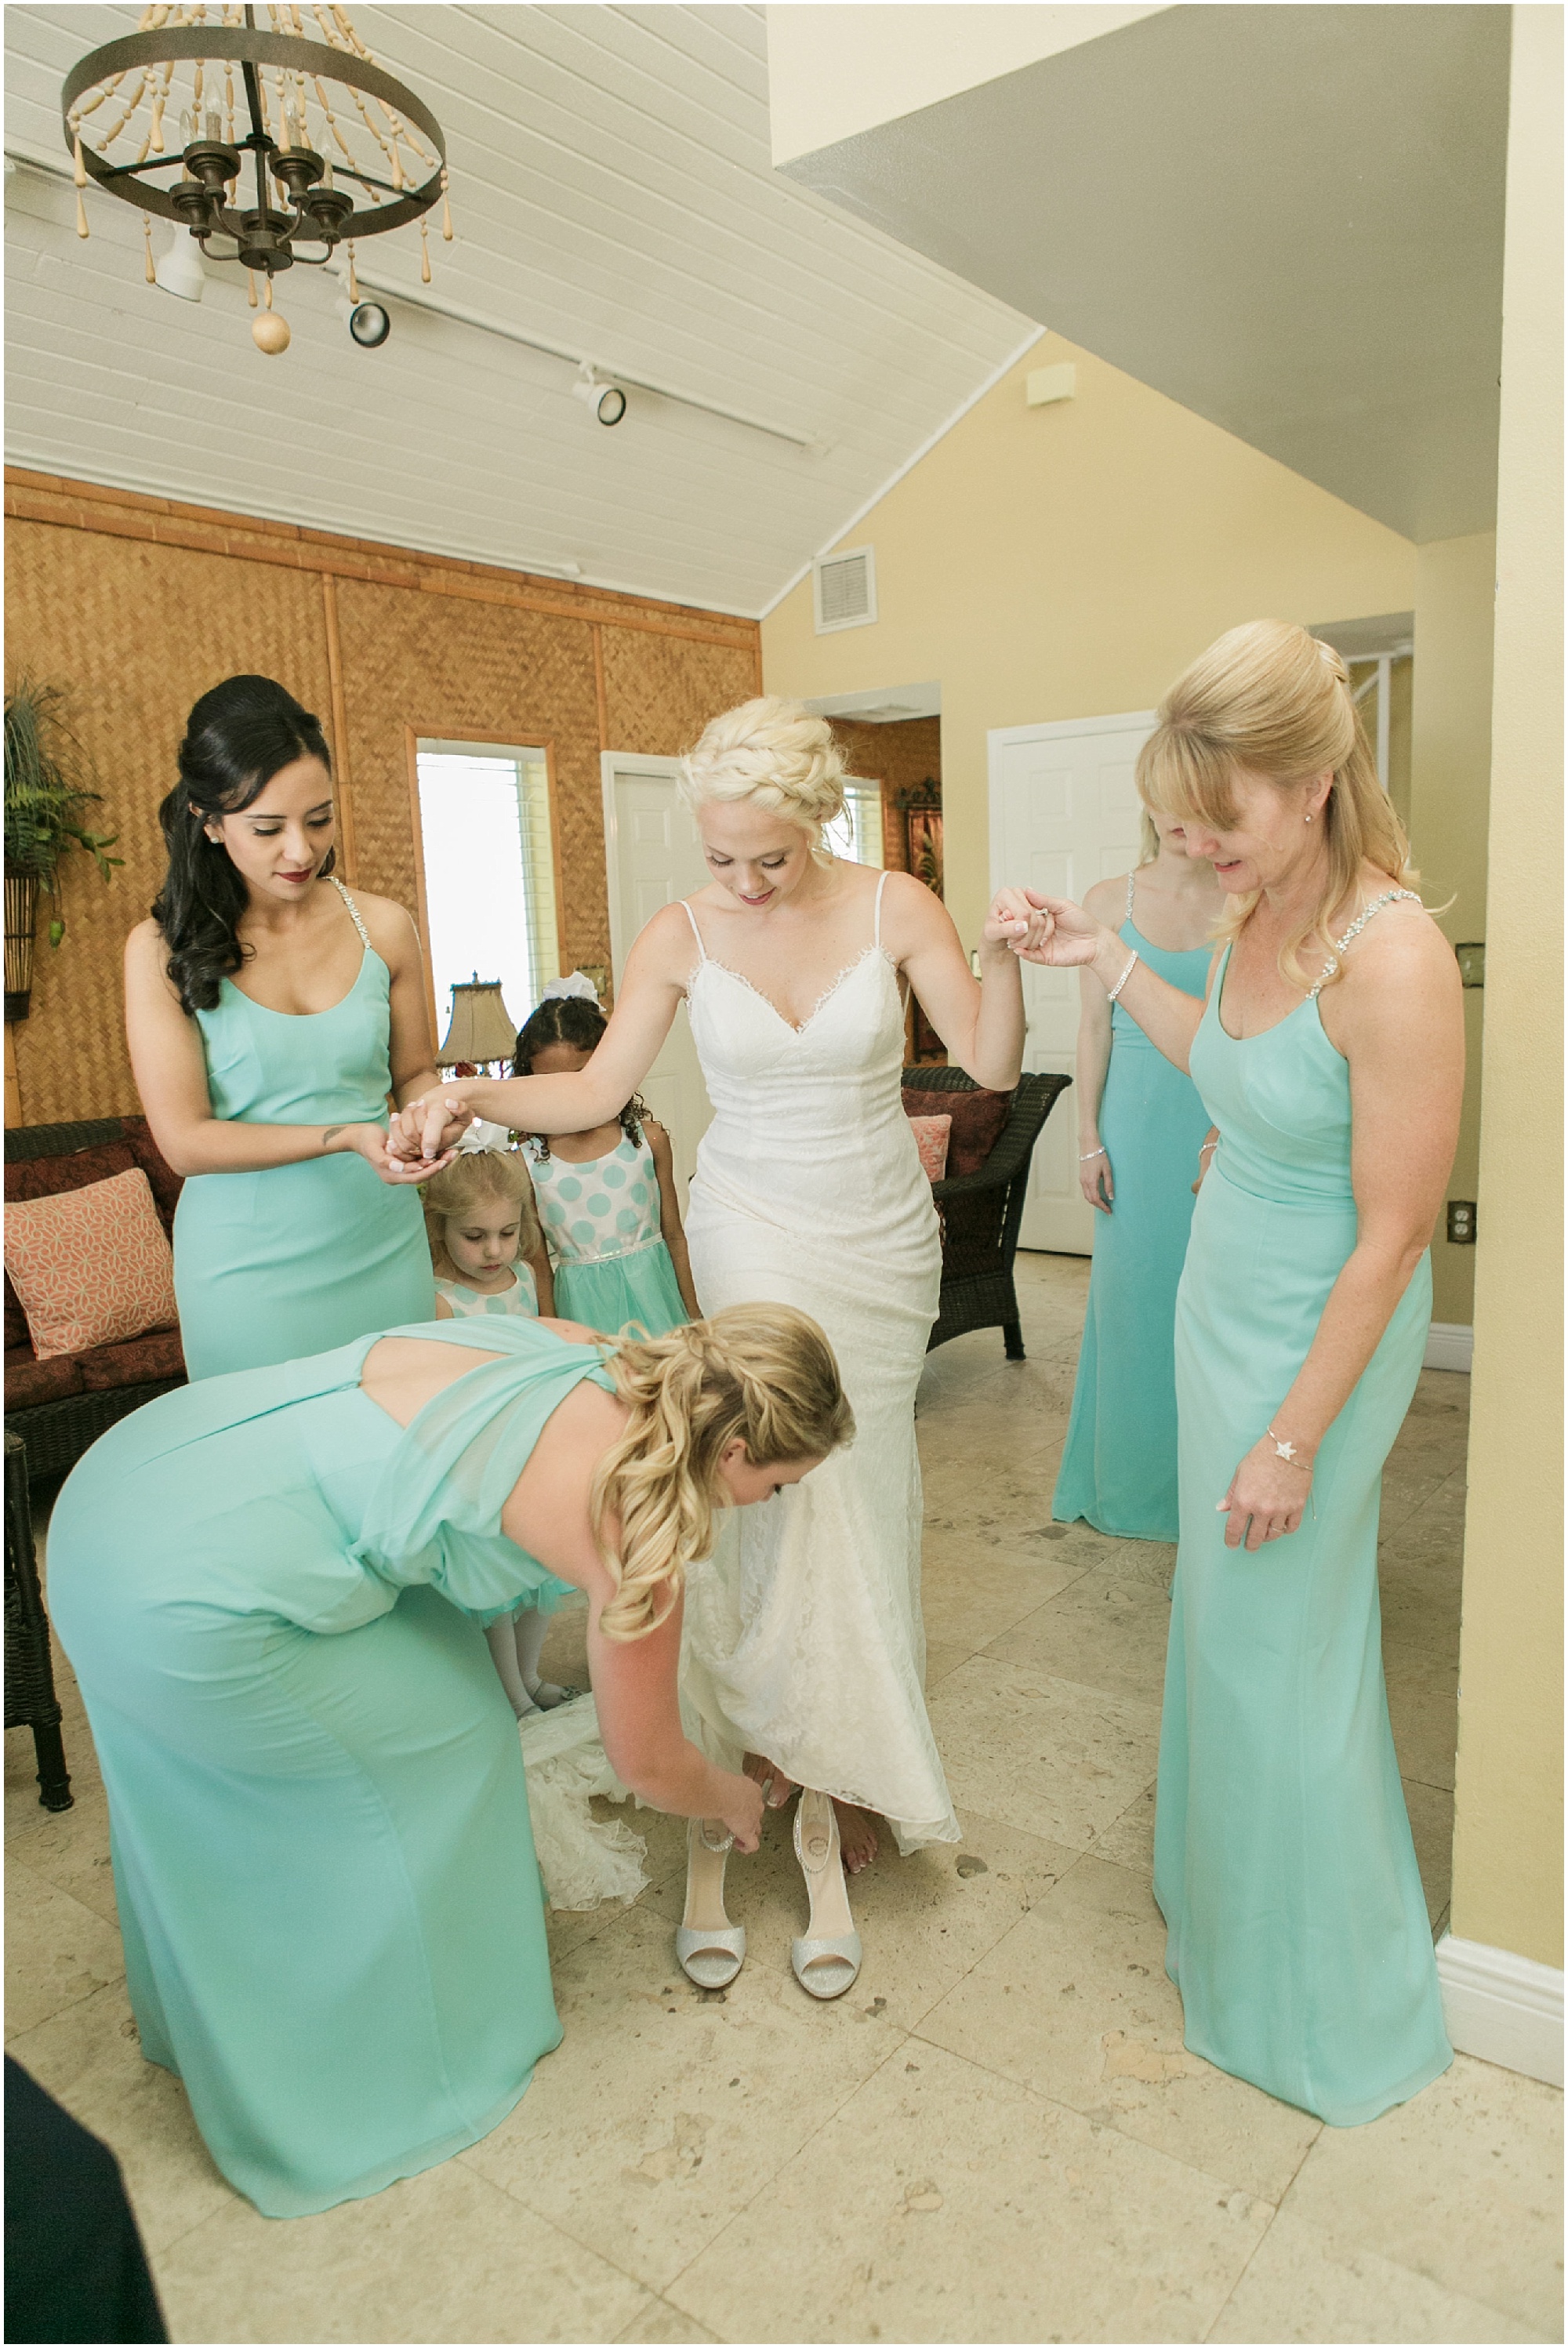 Bridesmaids holding bride's hands as she puts on her shoes